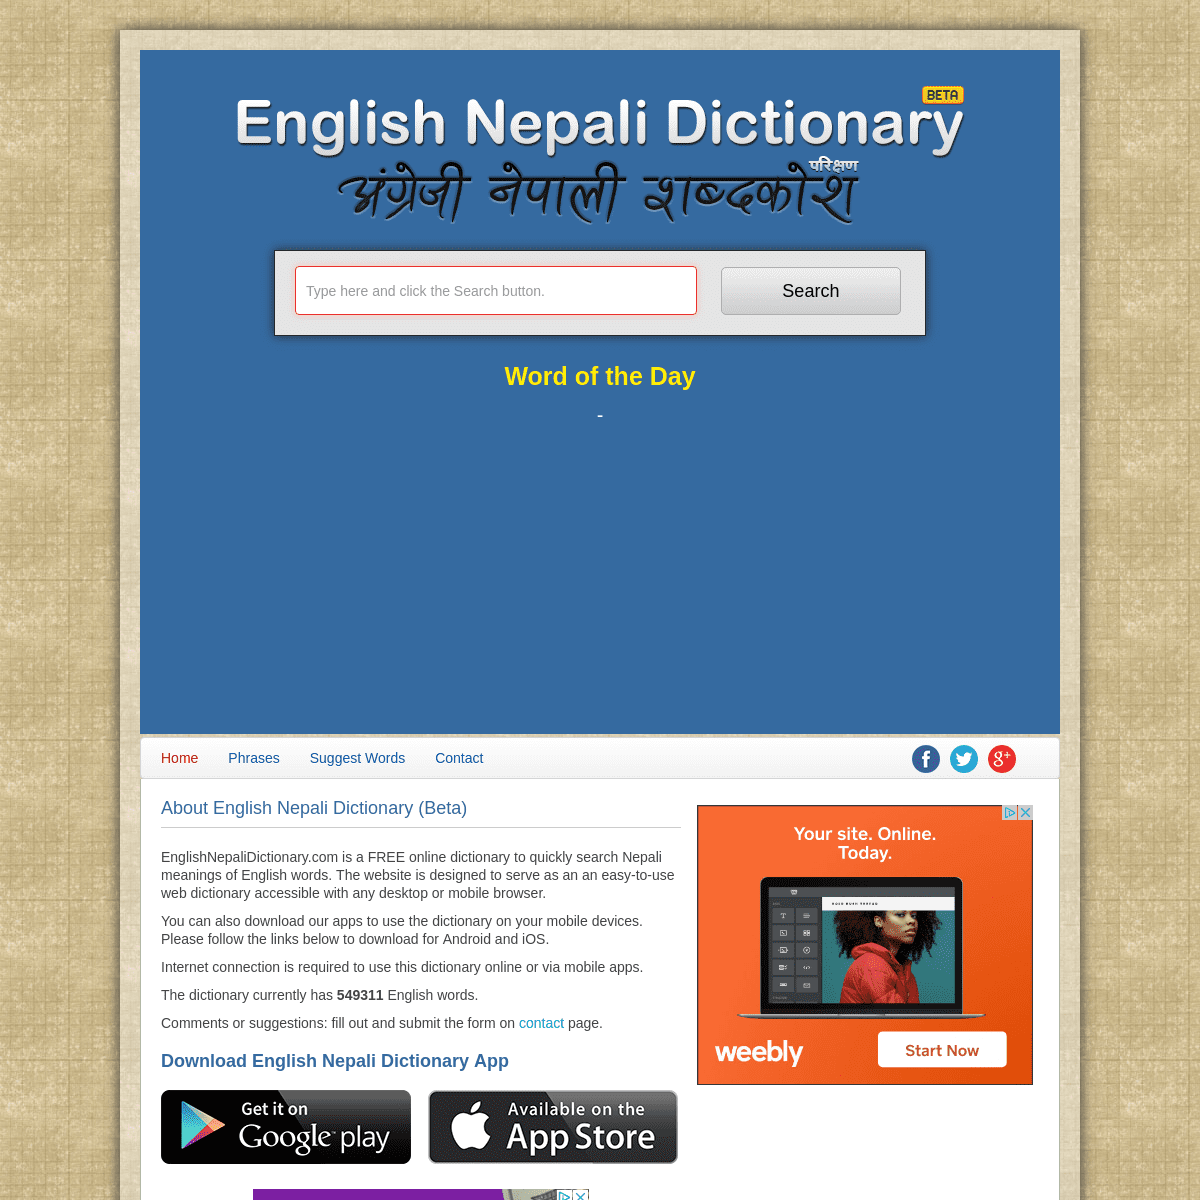 A complete backup of englishnepalidictionary.com